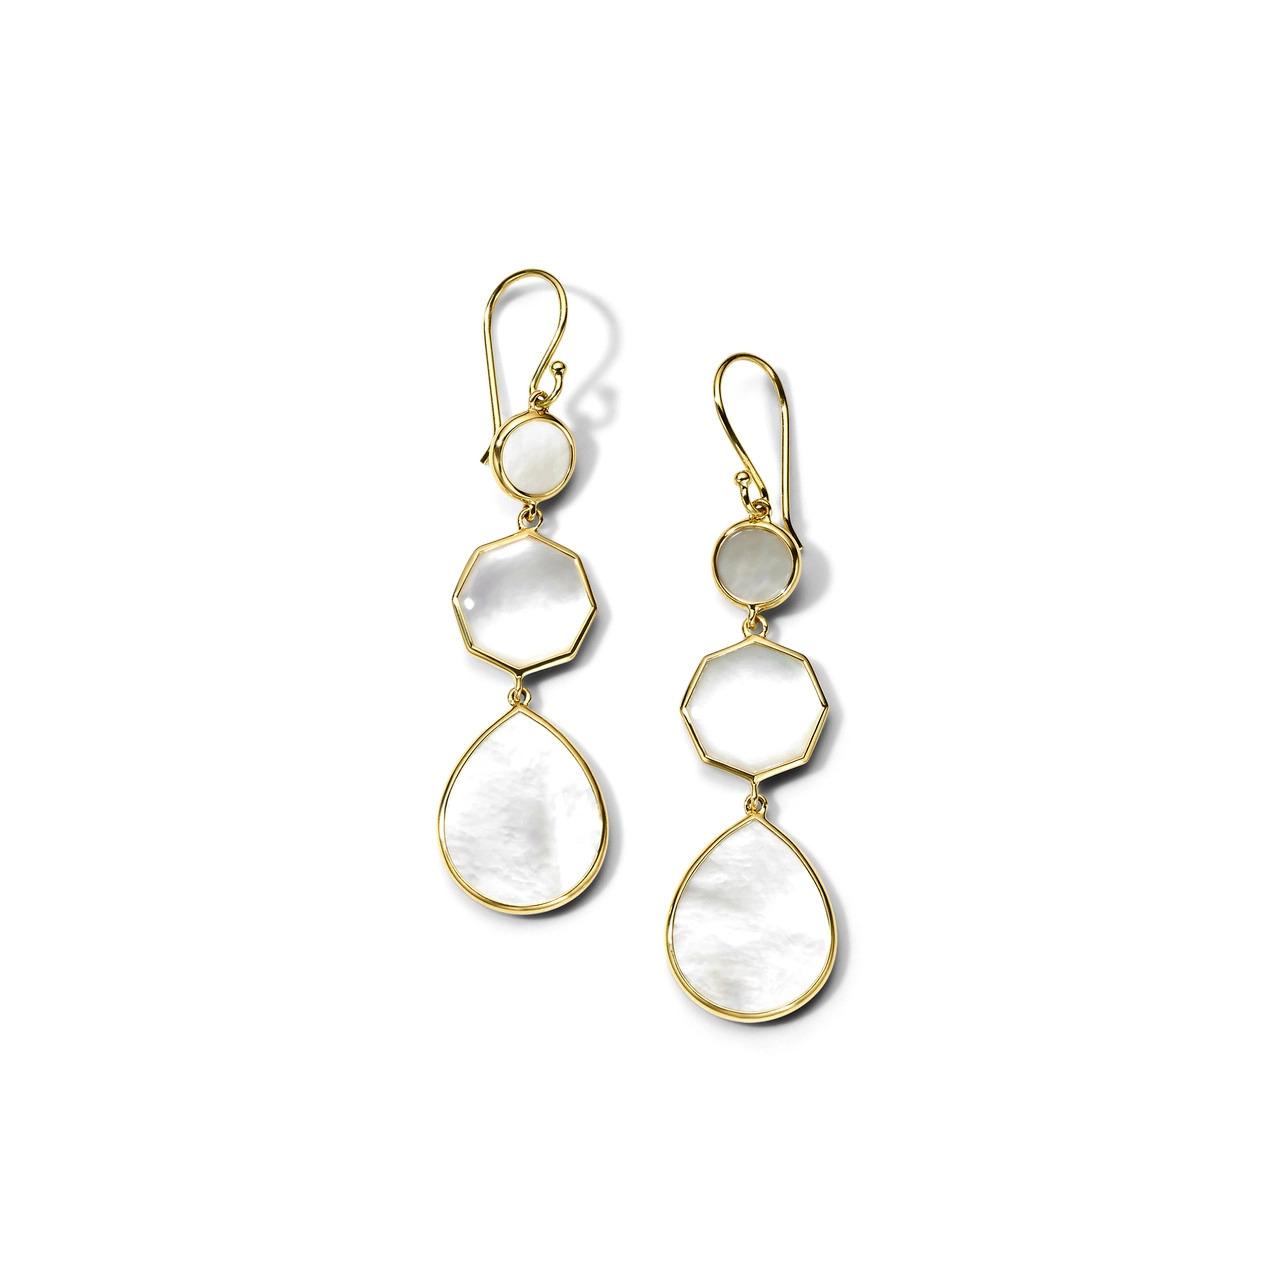 Ippolita 18k Polished Rock Candy Small Crazy 8's Earrings